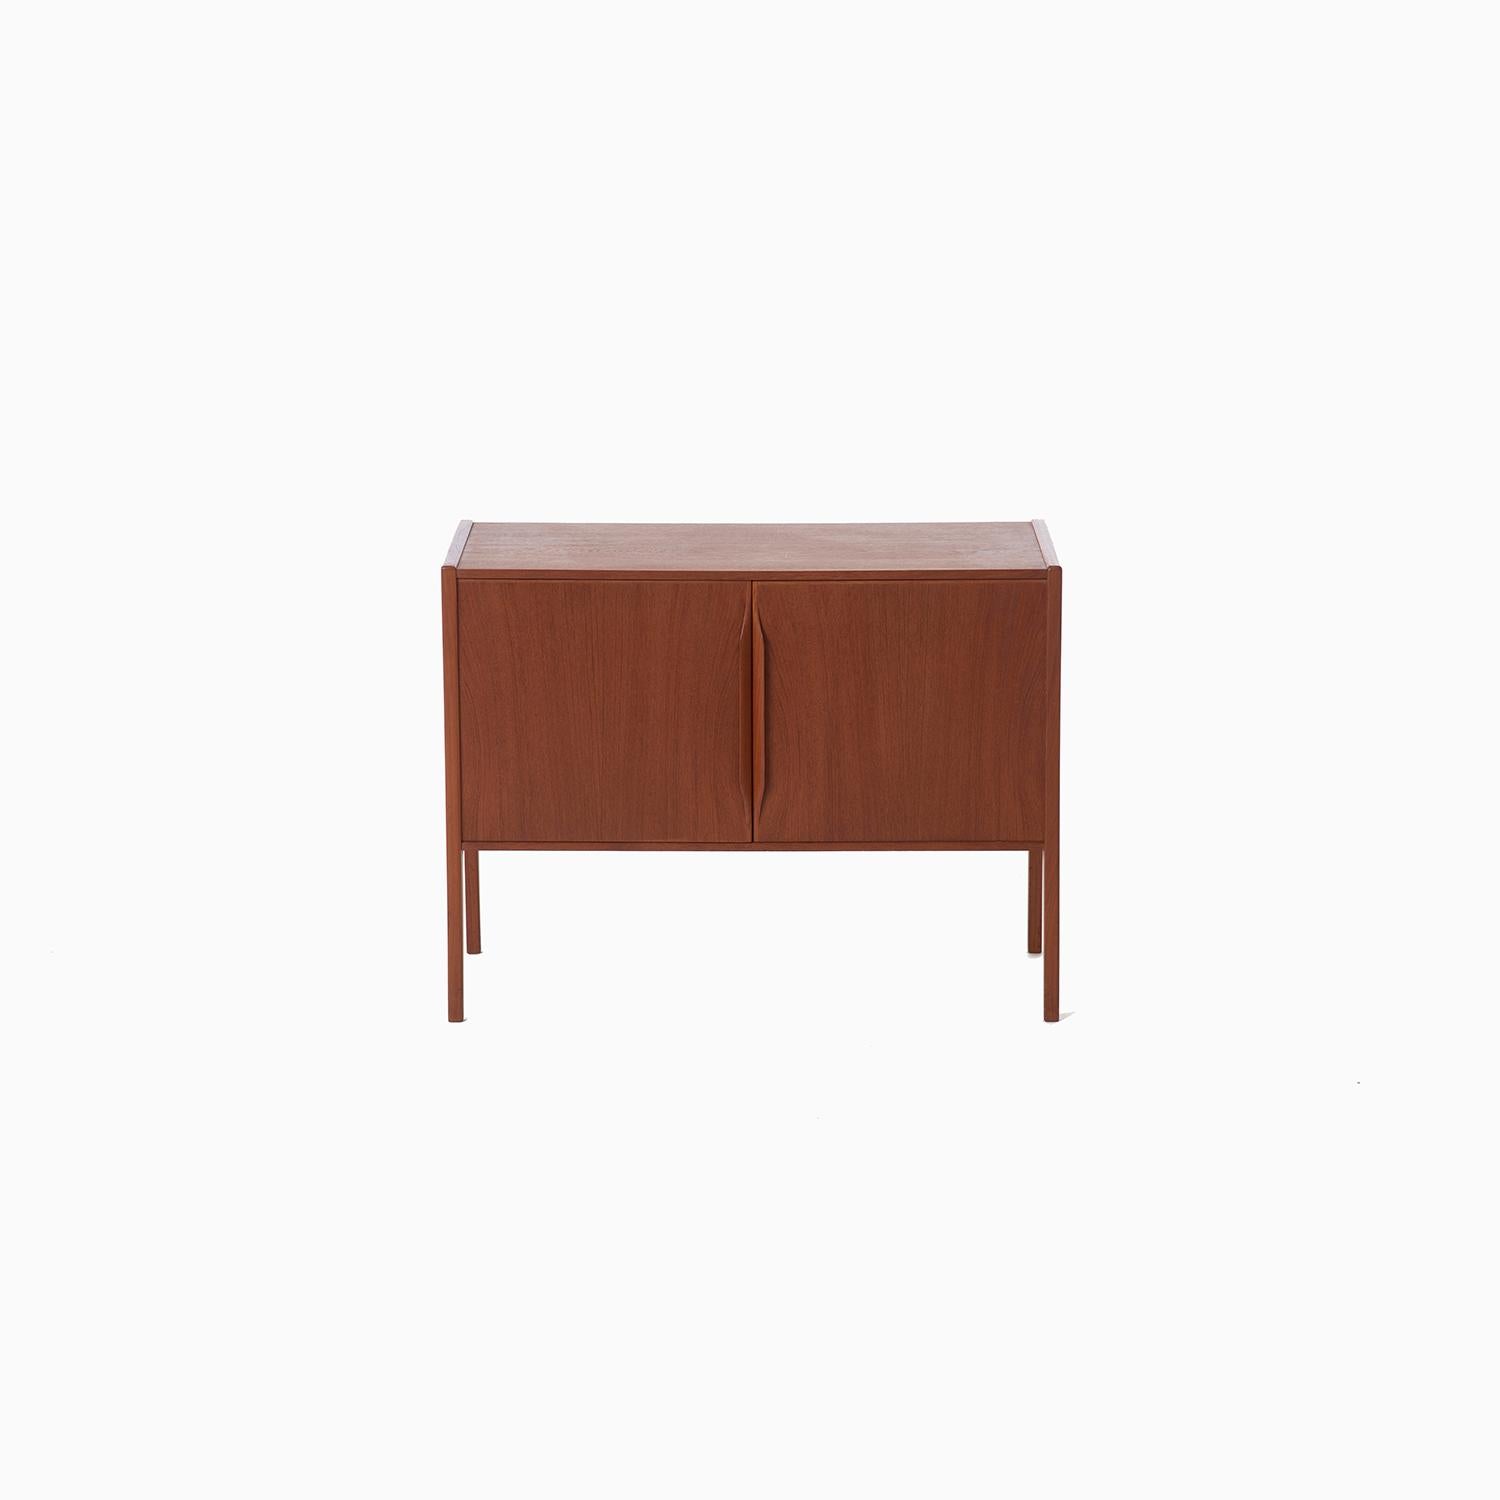 Danish modern teak cabinet designed by Kai Kristiansen and produced  by Aksel Kjersgaard.

Professional, skilled furniture restoration is an integral part of what we do every day. Our goal 
is to provide beautiful, functional furniture that honors